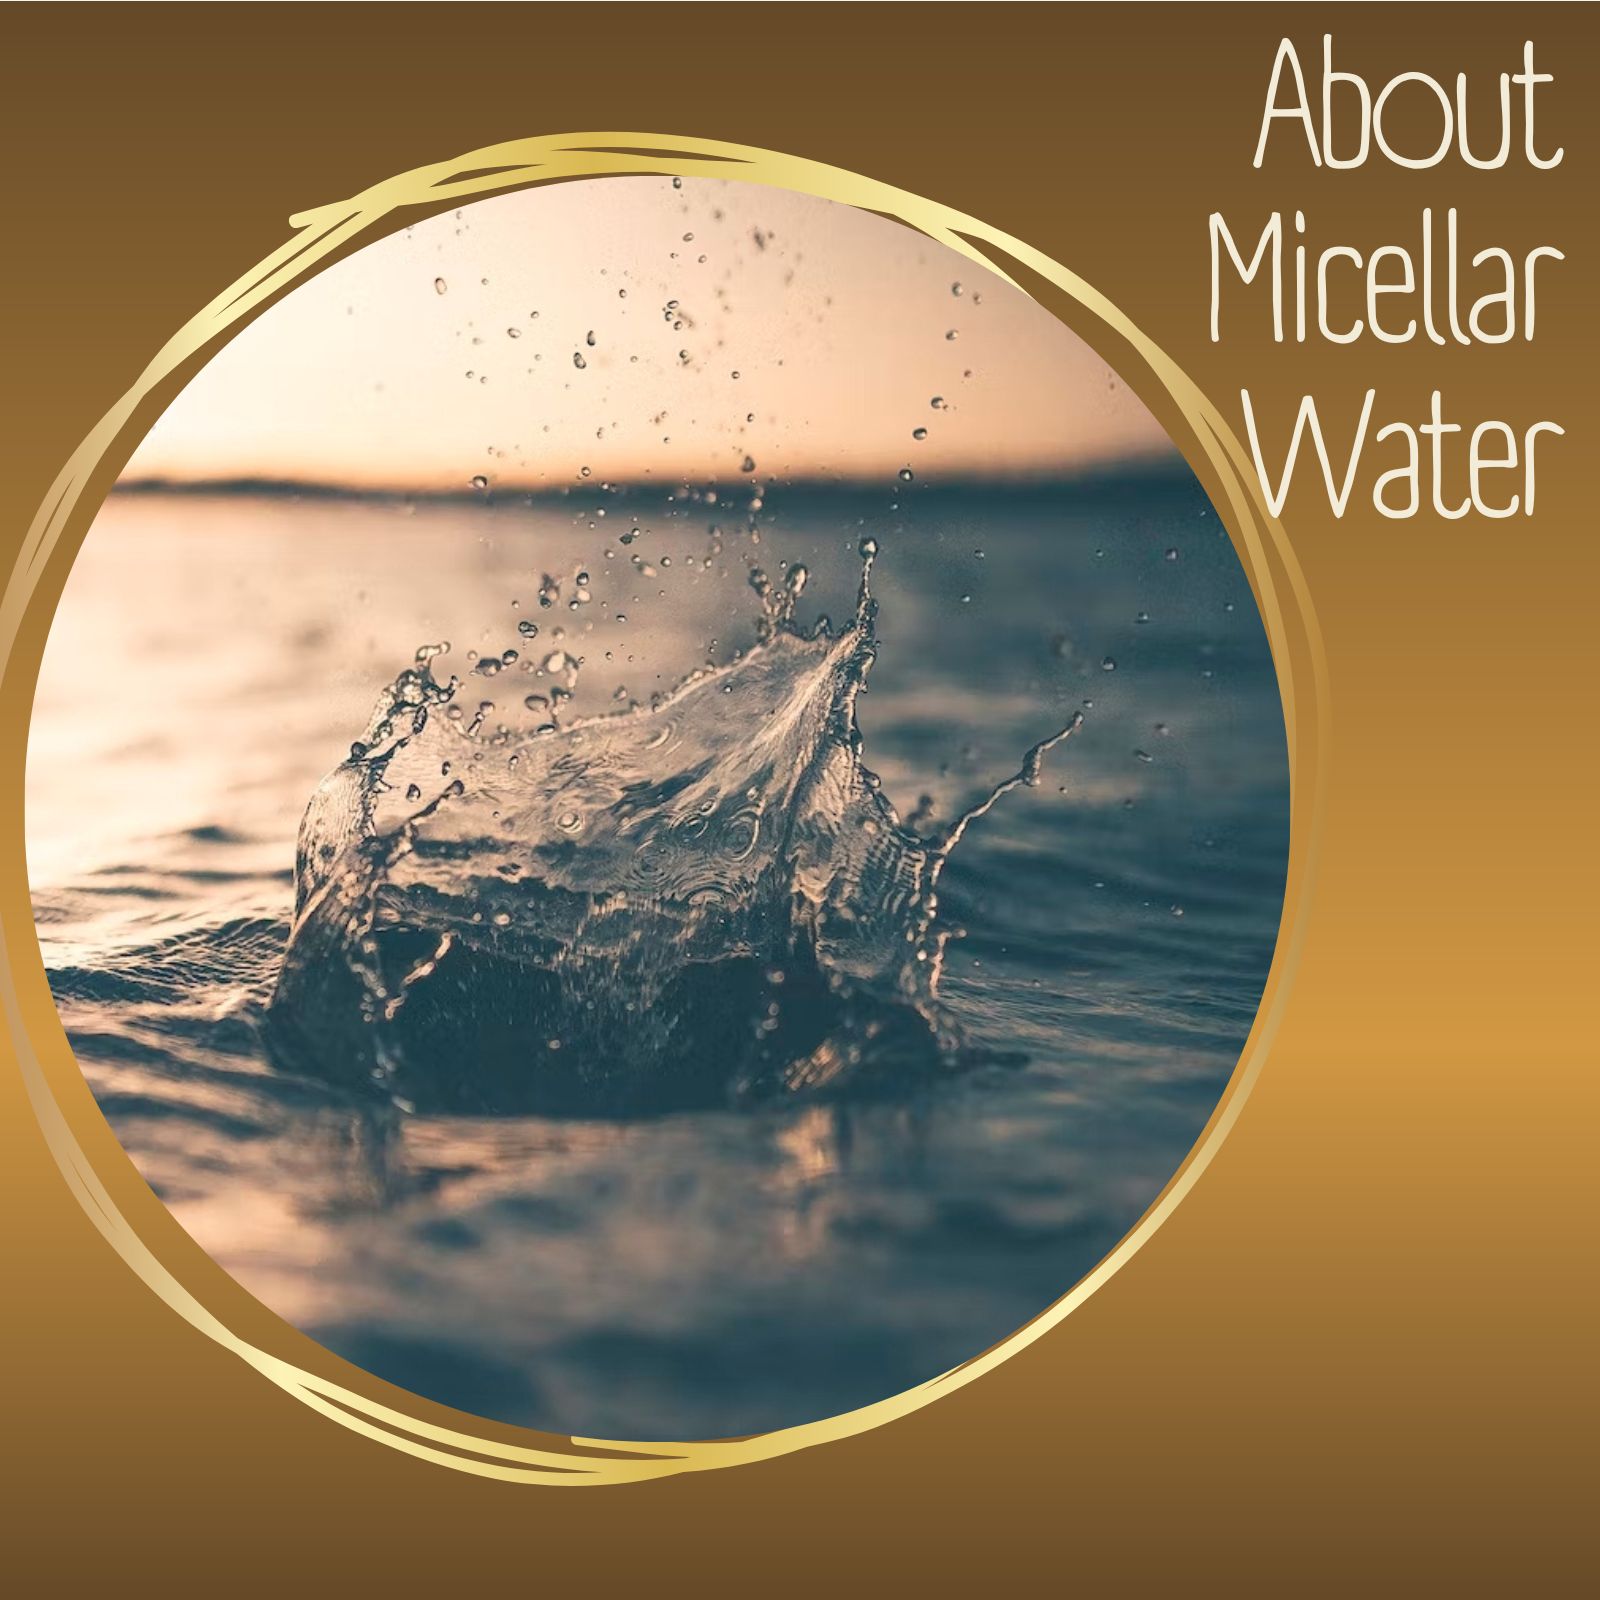 About Micellar Water